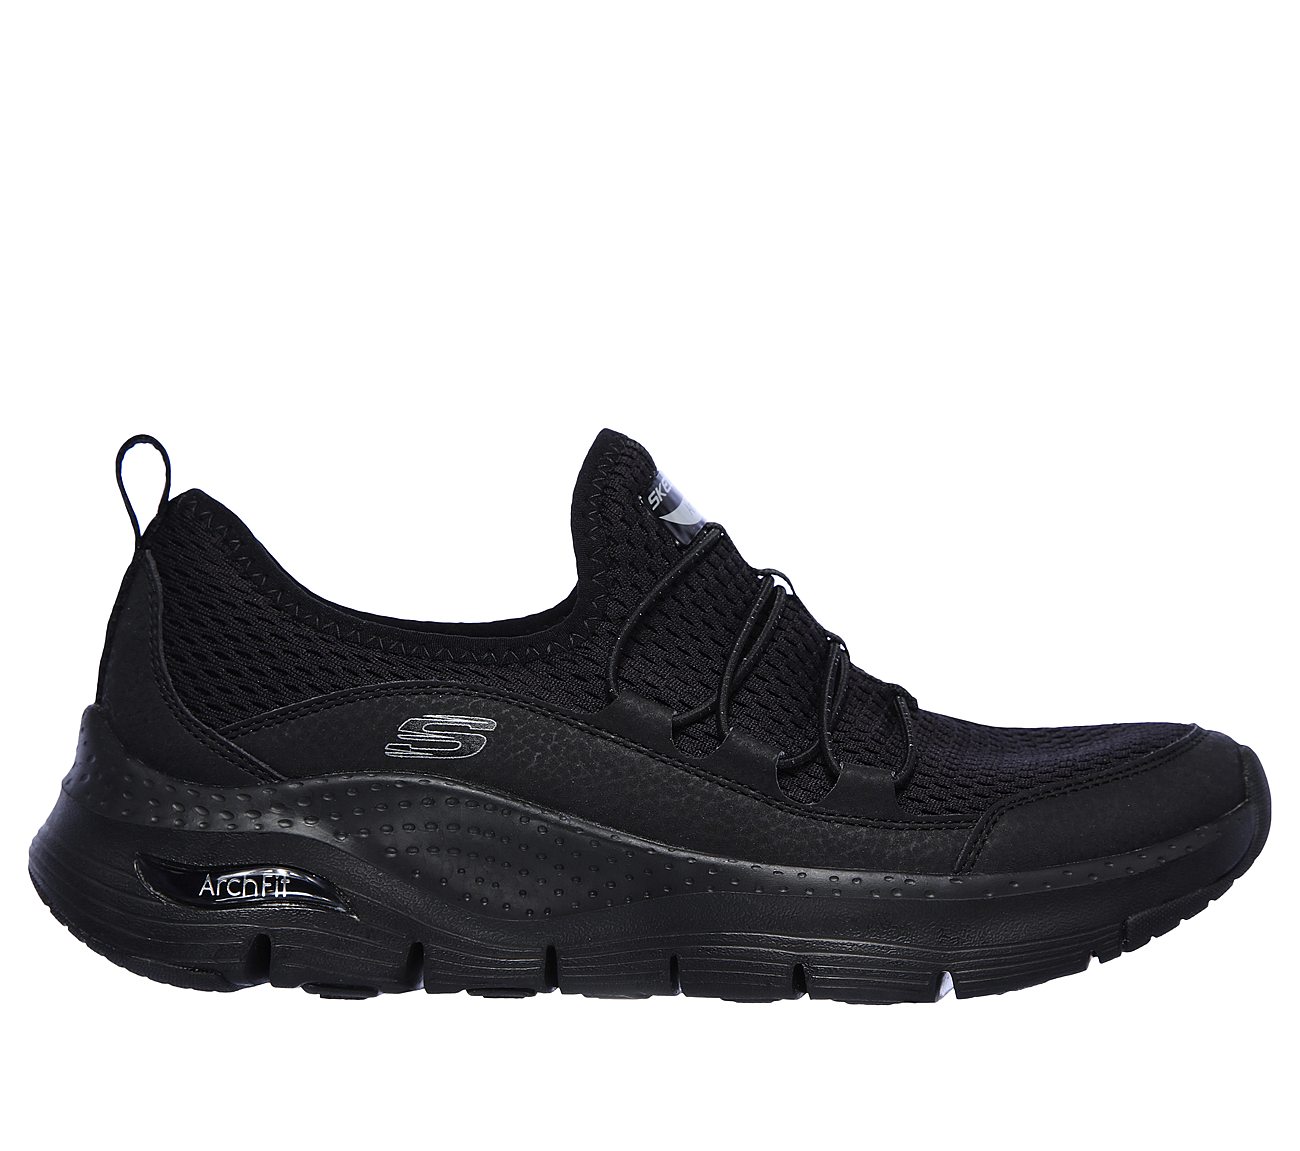 where can i buy skechers wide fit shoes